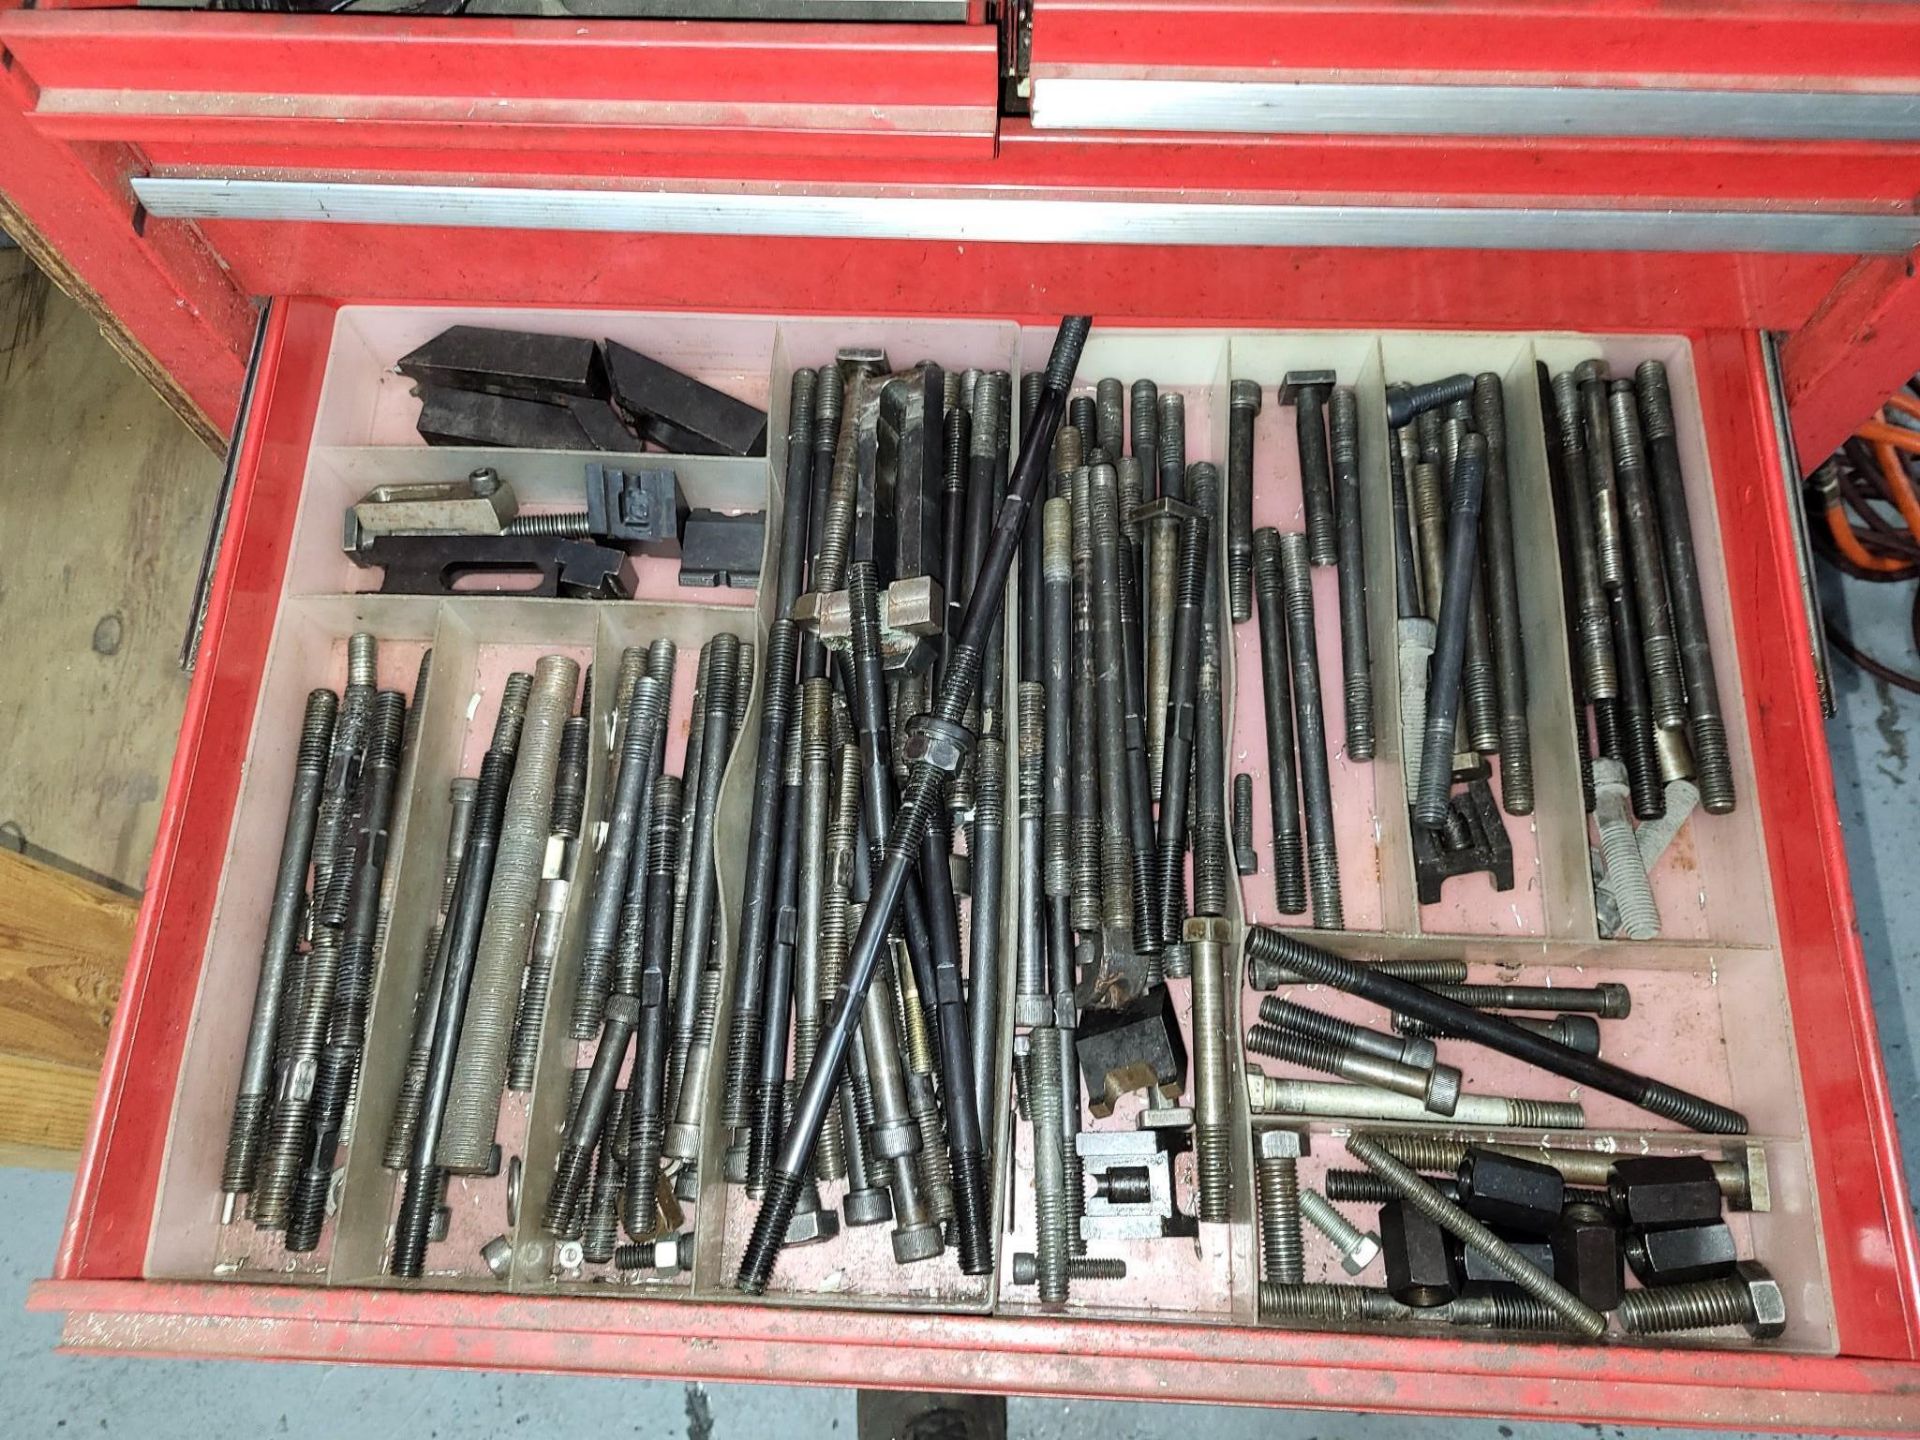 LARGE LOT OF MILLING TOOLS, TAPS, CARBIDE INSERTS, SETUP HARDWARE AND HAND TOOLS - Image 6 of 24